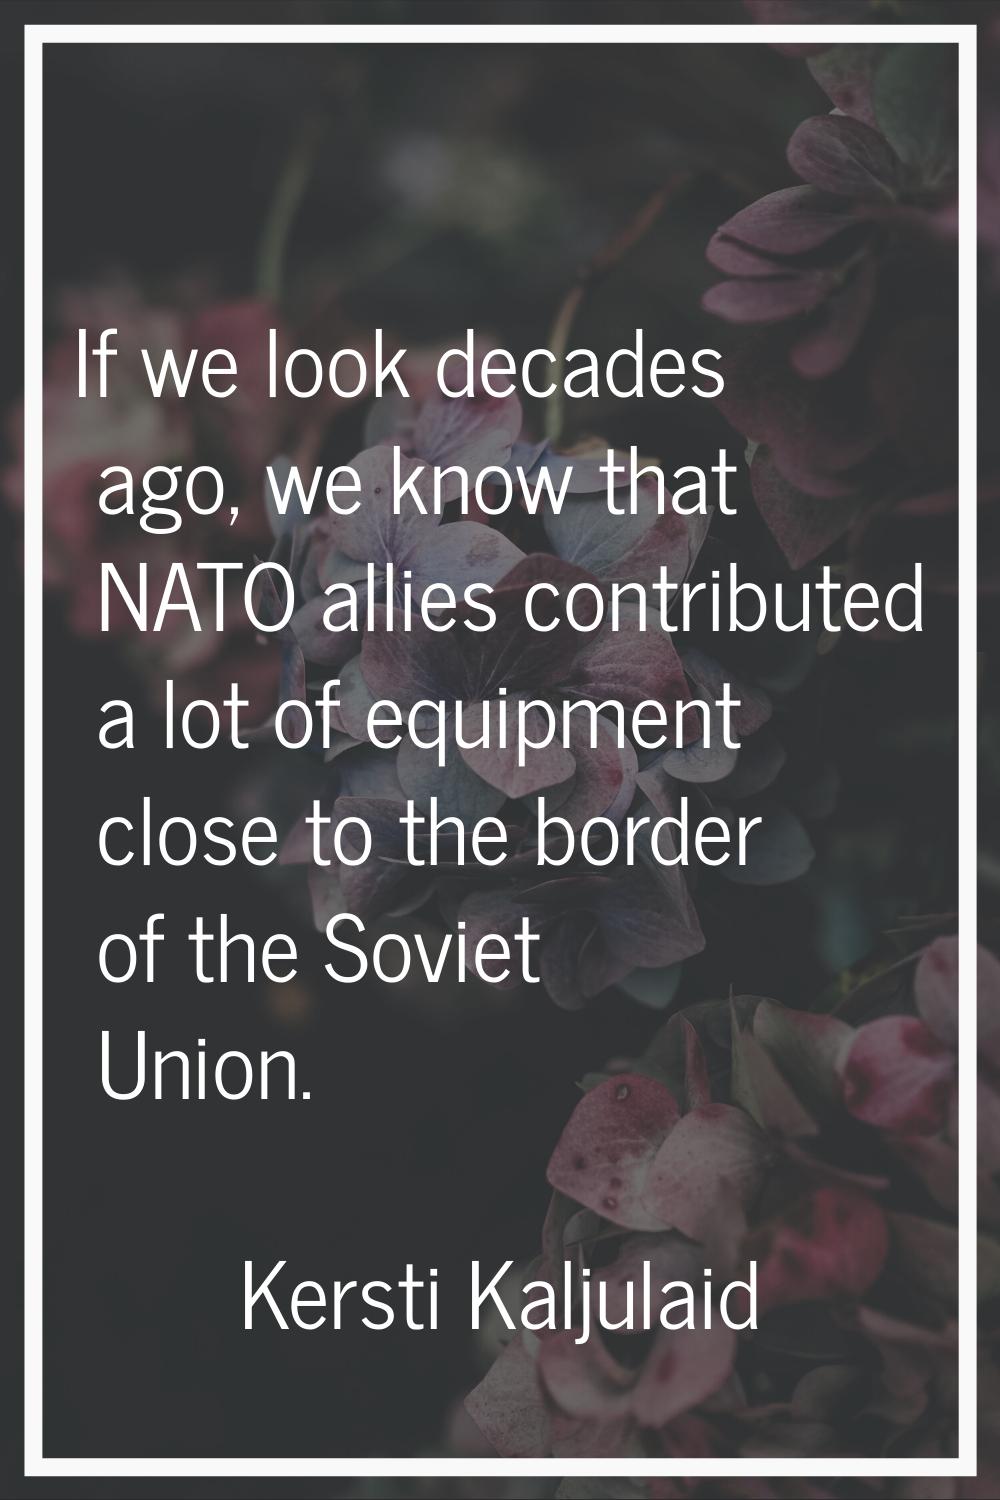 If we look decades ago, we know that NATO allies contributed a lot of equipment close to the border